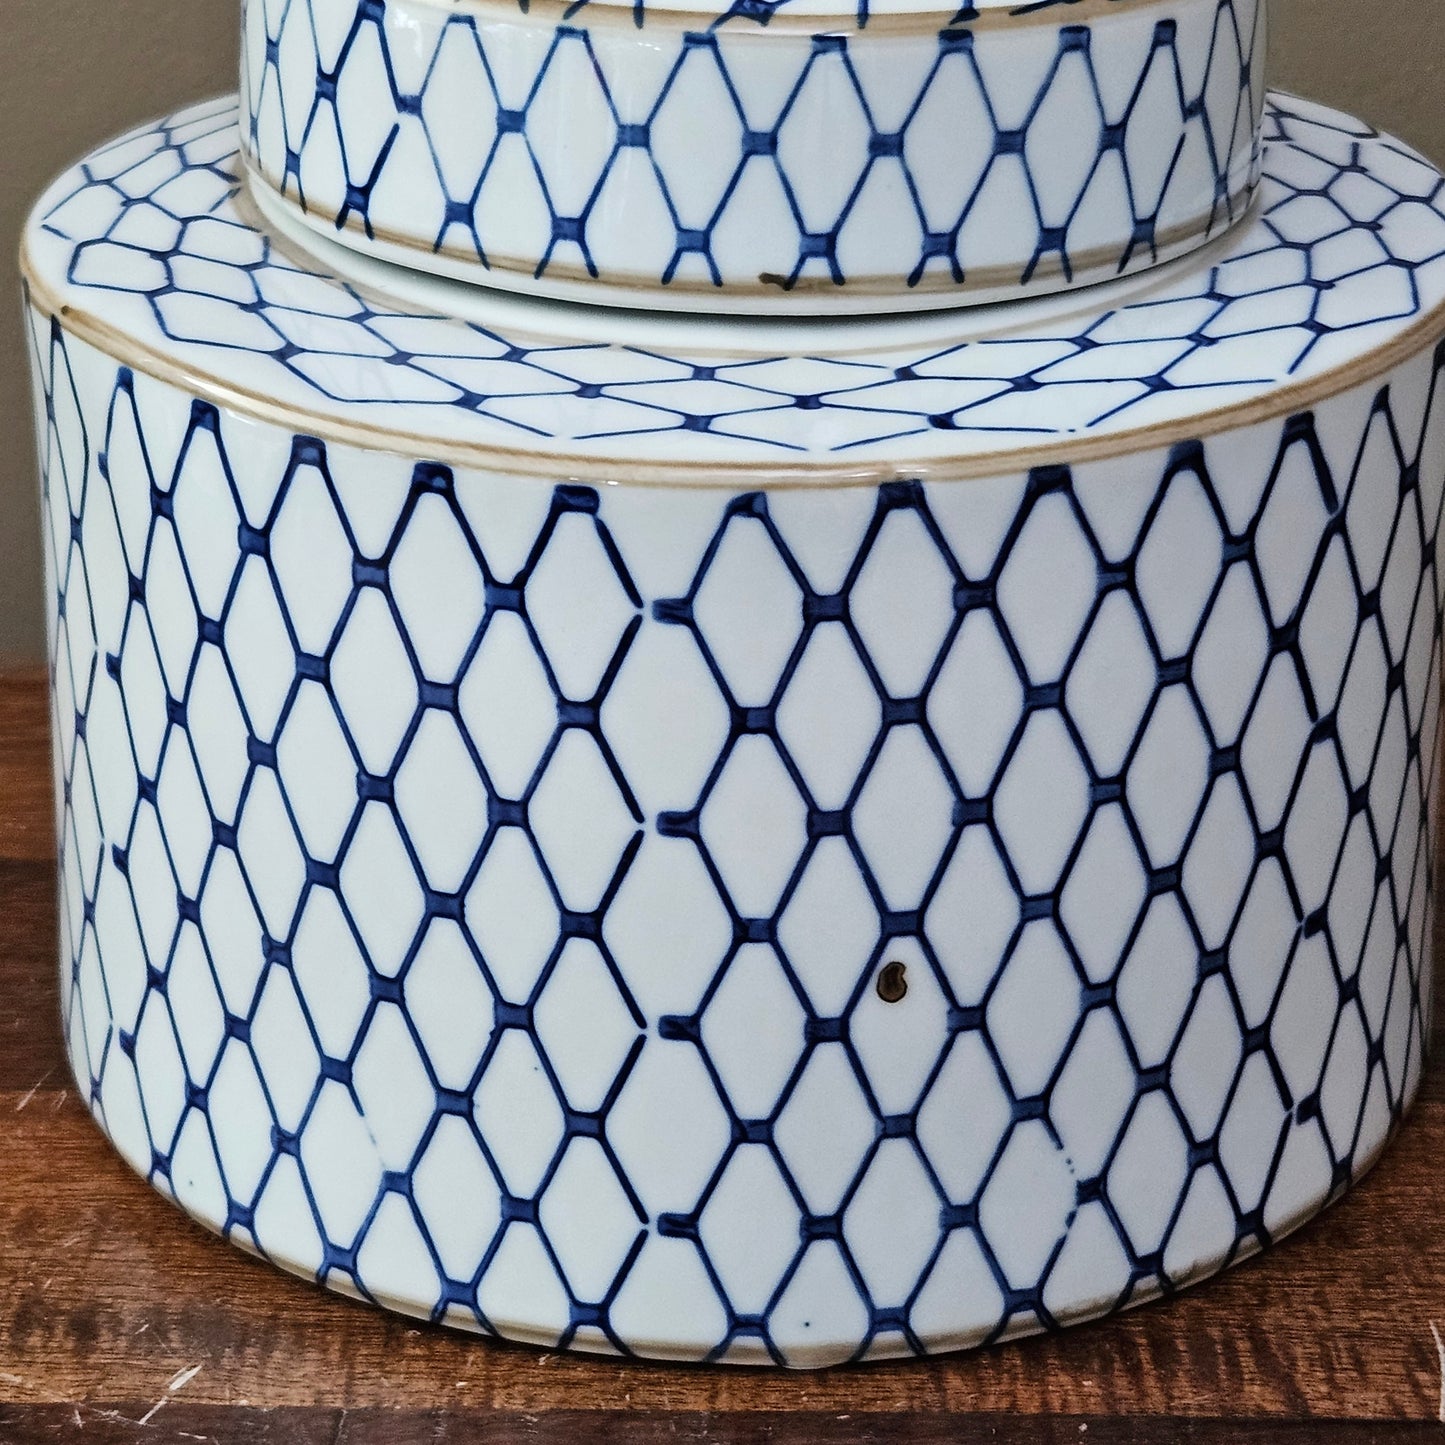 8" Blue & White Porcelain Canister Jar with Netted Design & Lid ~ 4 Available